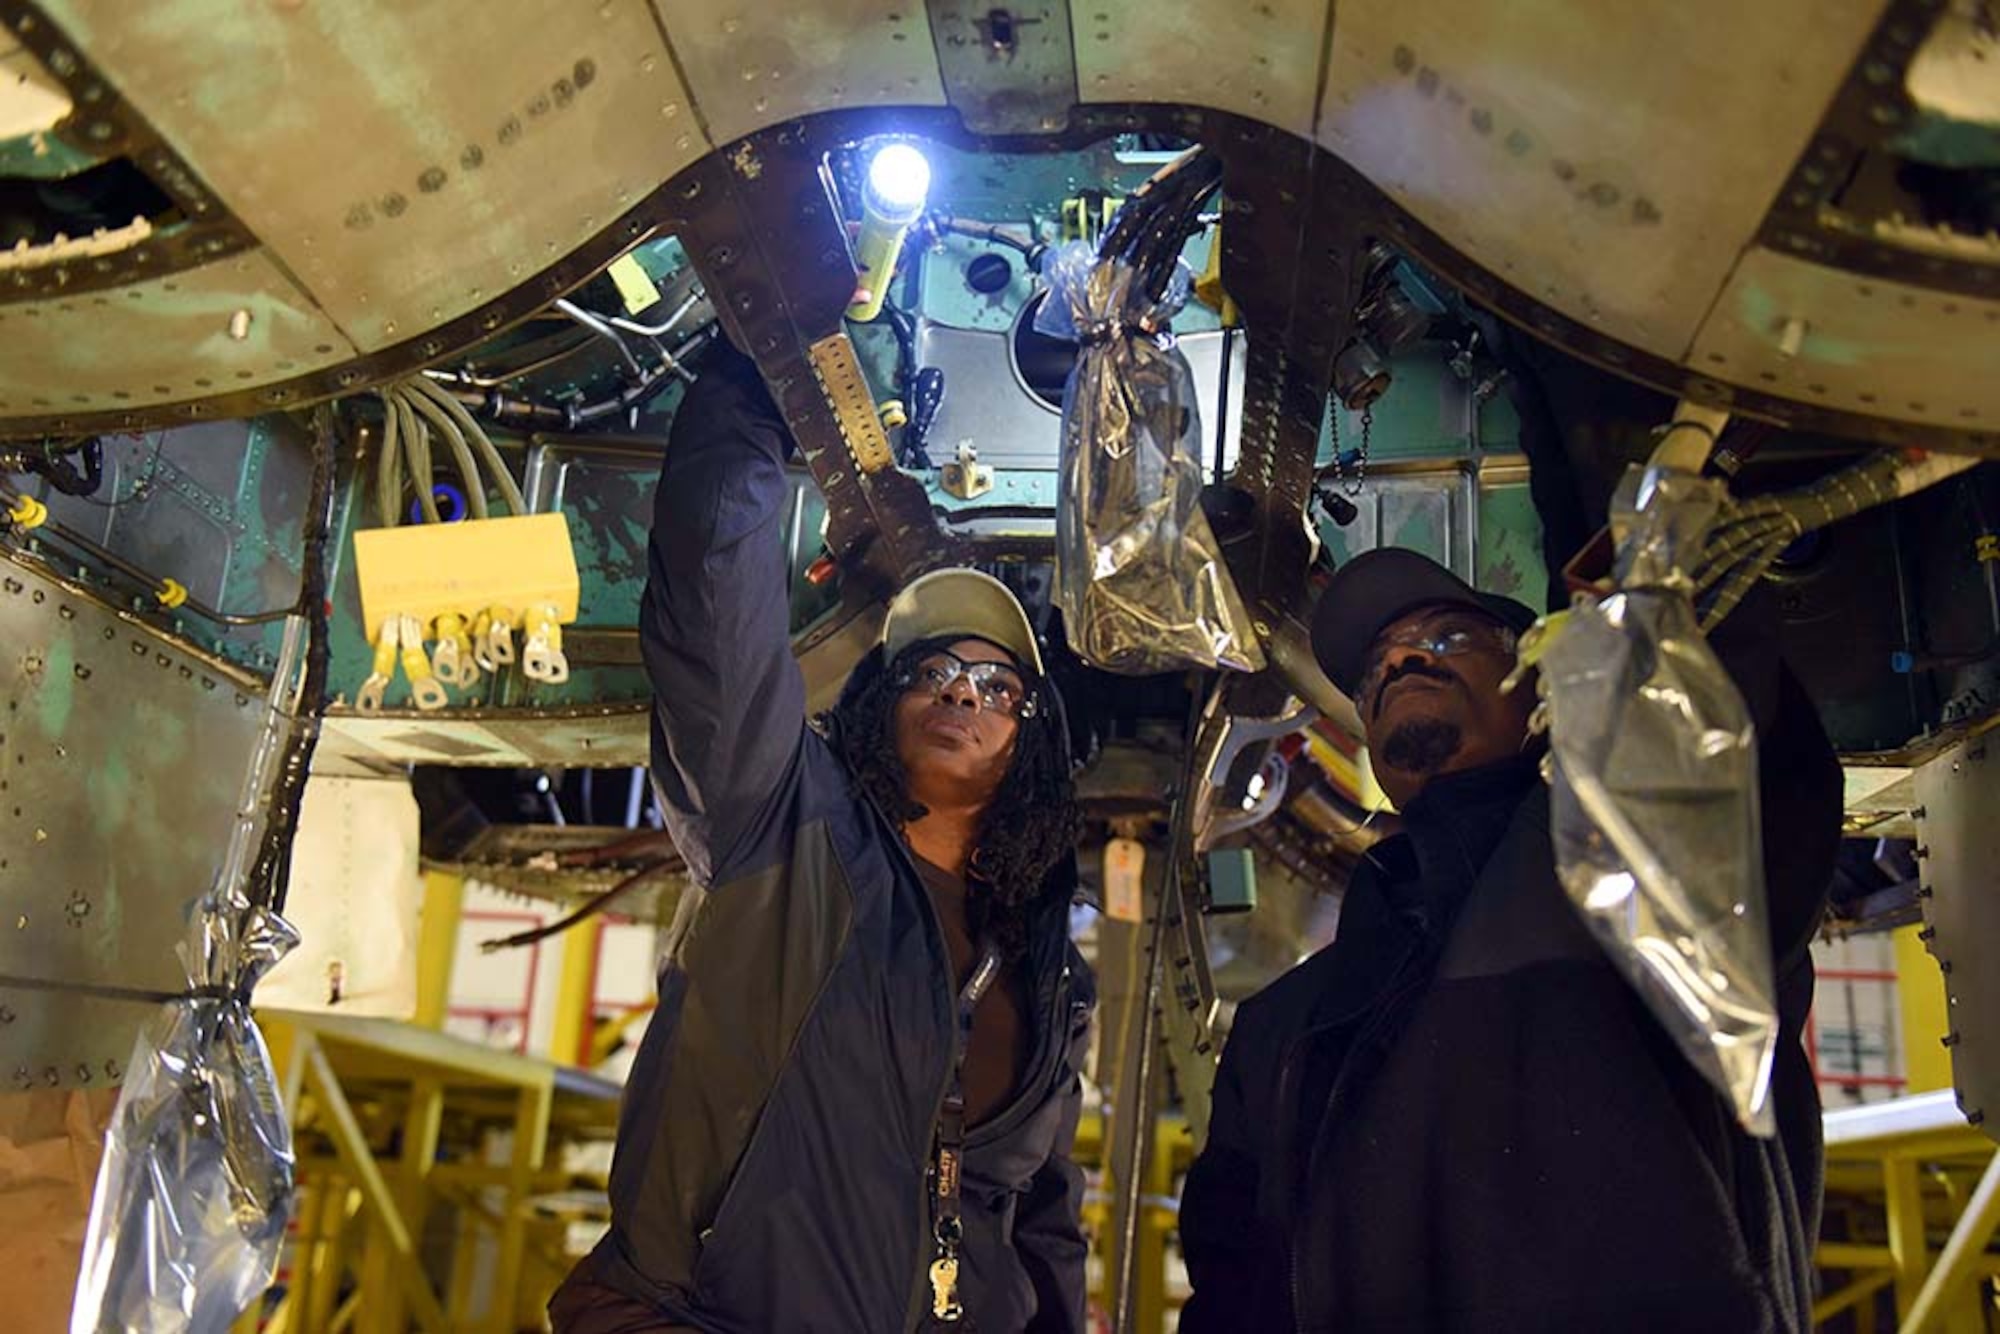 Tanya Thompson, 561st Aircraft Maintenance Squadron aircraft worker, and Alvin Abraham, 561st AMXS aircraft hydraulic systems technician, install hydraulic lines in the airframe mounted accessory drive area of an F-15 during depot maintenance Feb. 16, 2017, at Robins Air Force Base. (U.S. Air Force photo by Tommie Horton/Released)